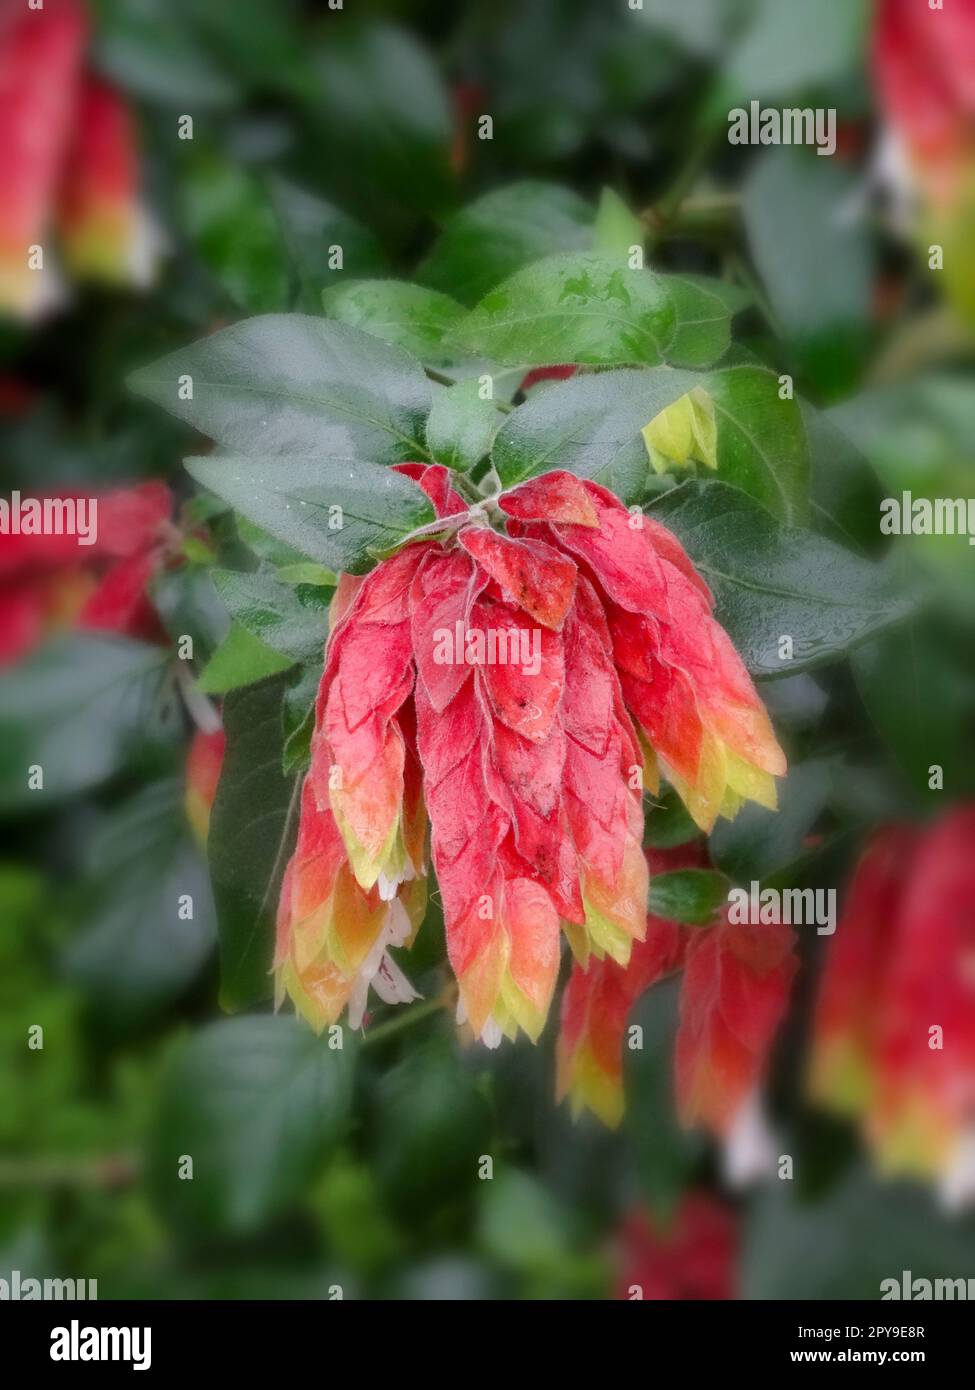 Natural close up flowering plant portrait of pretty Mexican shrimp plant, Justicia brandegeeana, flowering Stock Photo